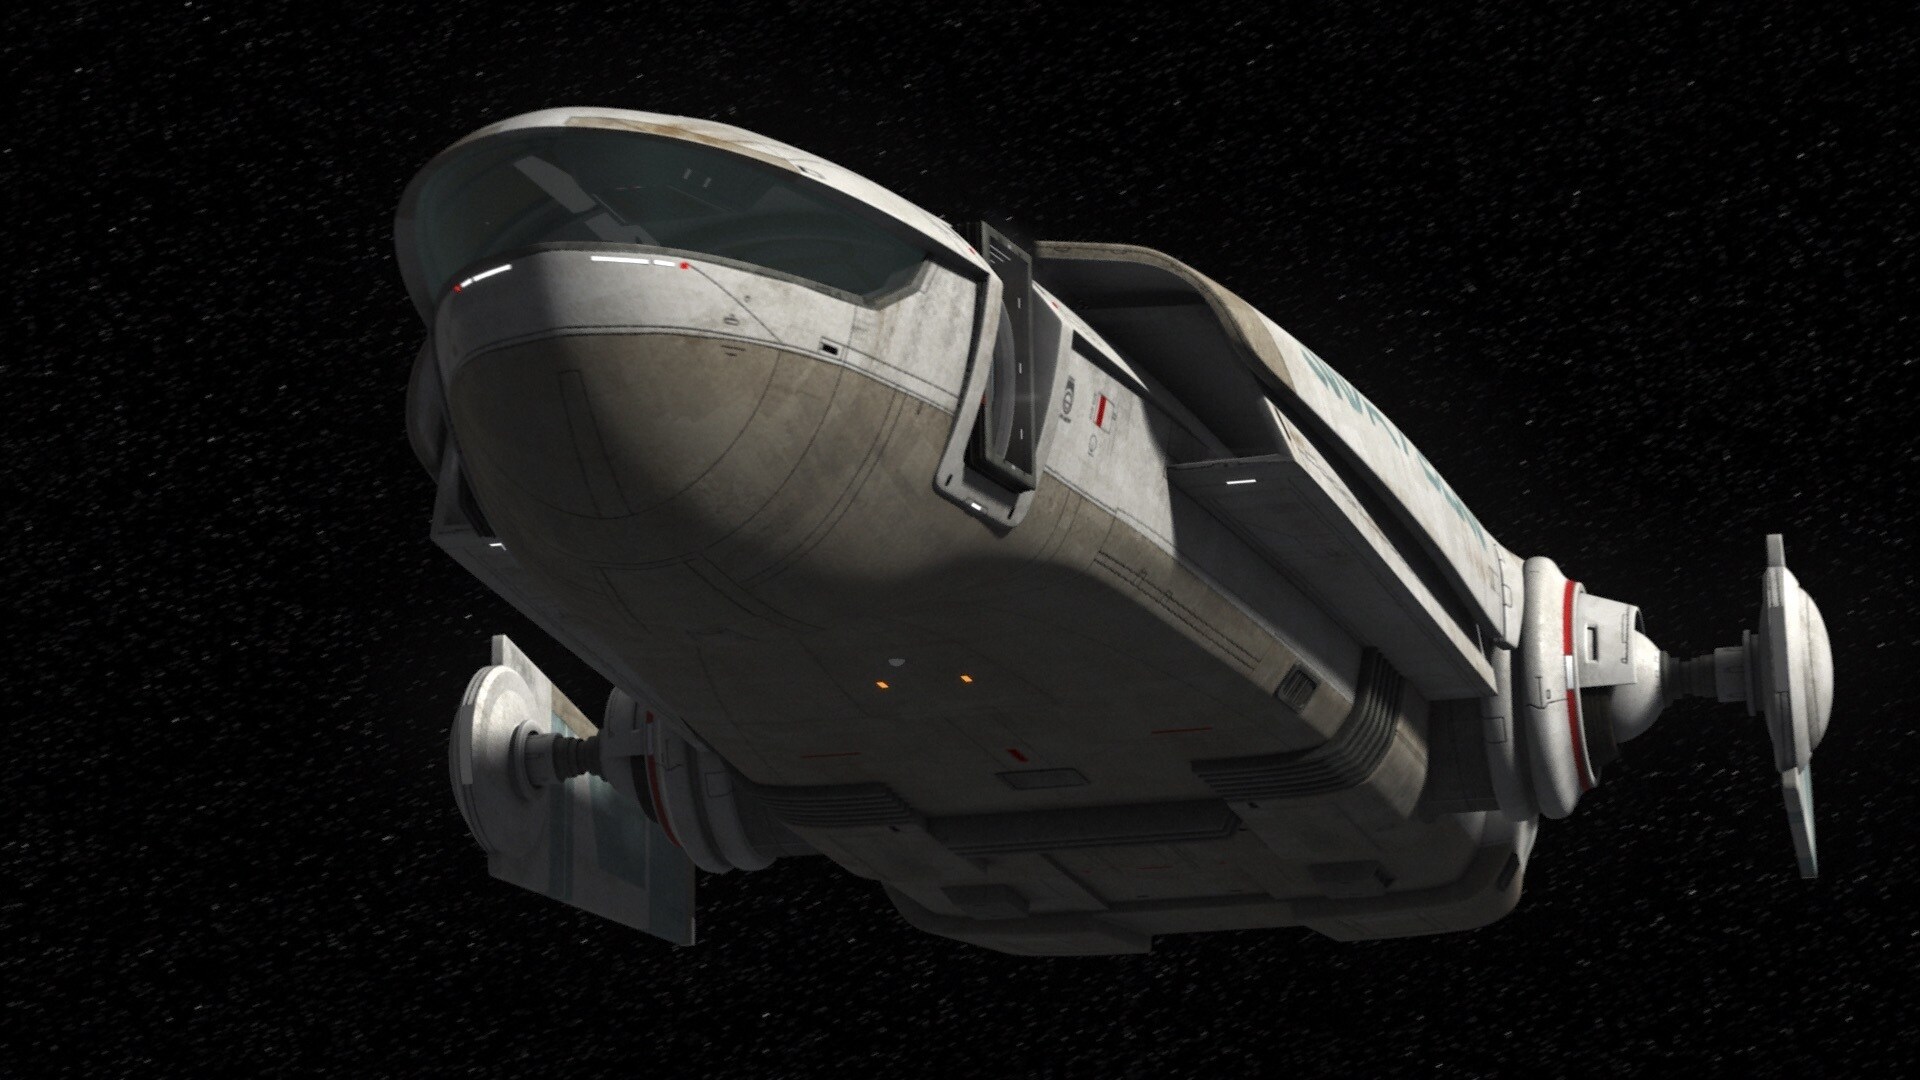 The starbus is a reuse of the Phoenix diplomatic vessel first seen in Star Wars: The Clone Wars, ...